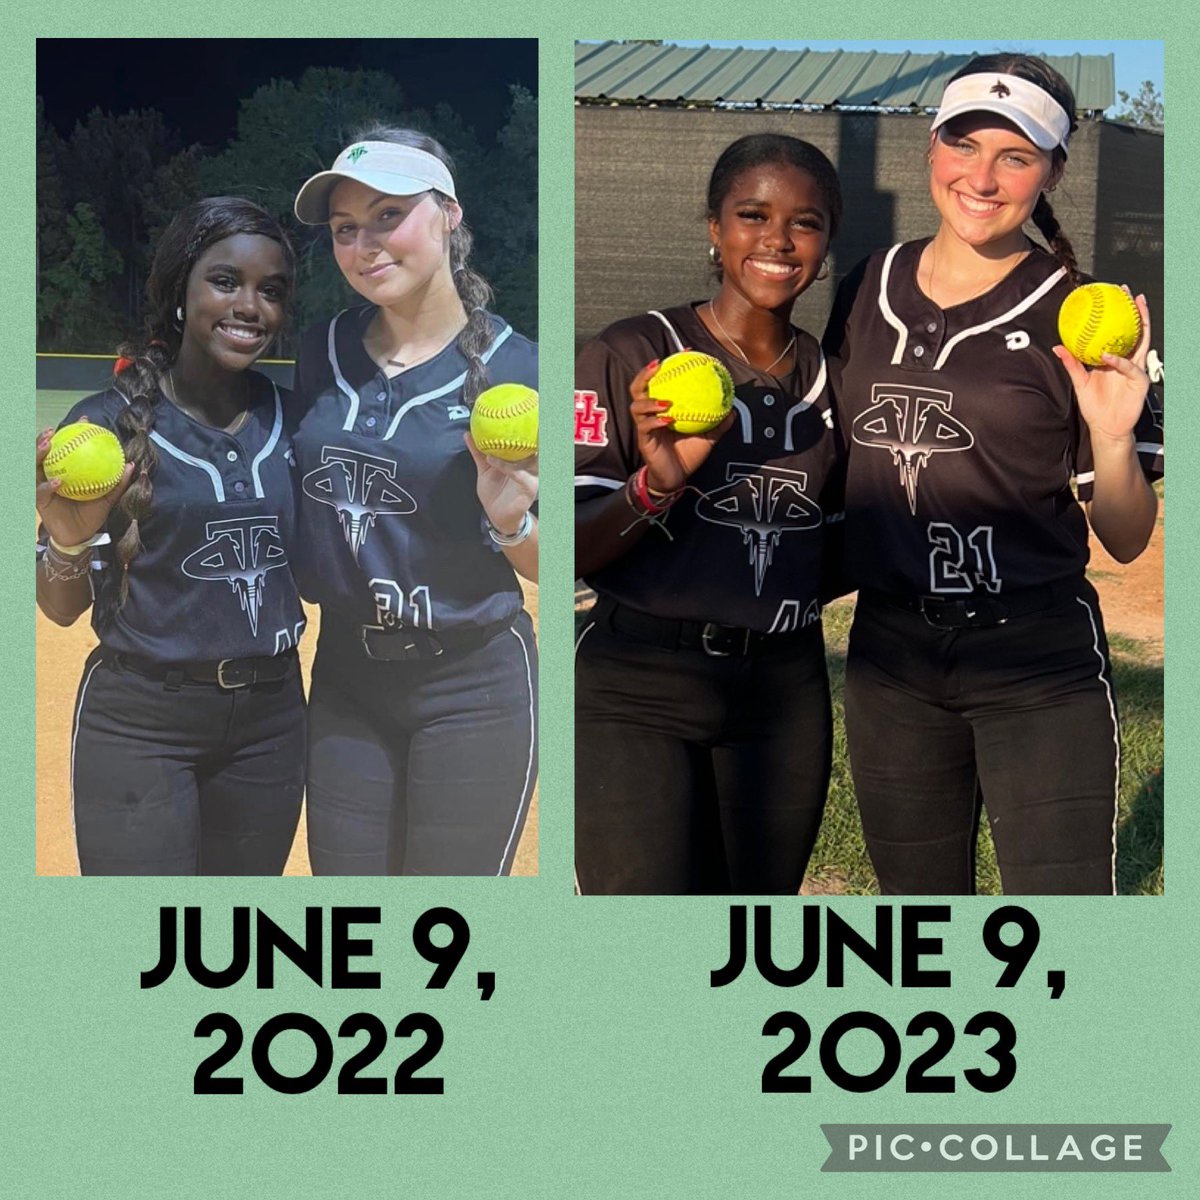 First day of the Hotshots Invitational went a little something like last year.. Same tourney, same unis, same dingers for @UHCougarSB signee @kayprudhommeSB and @TXStateSoftball commit, @GarrettMayson! 💣💣Divas play at 12:20 & 2 pm tomorrow. #hardworkpaysoff #DivaBombSquad